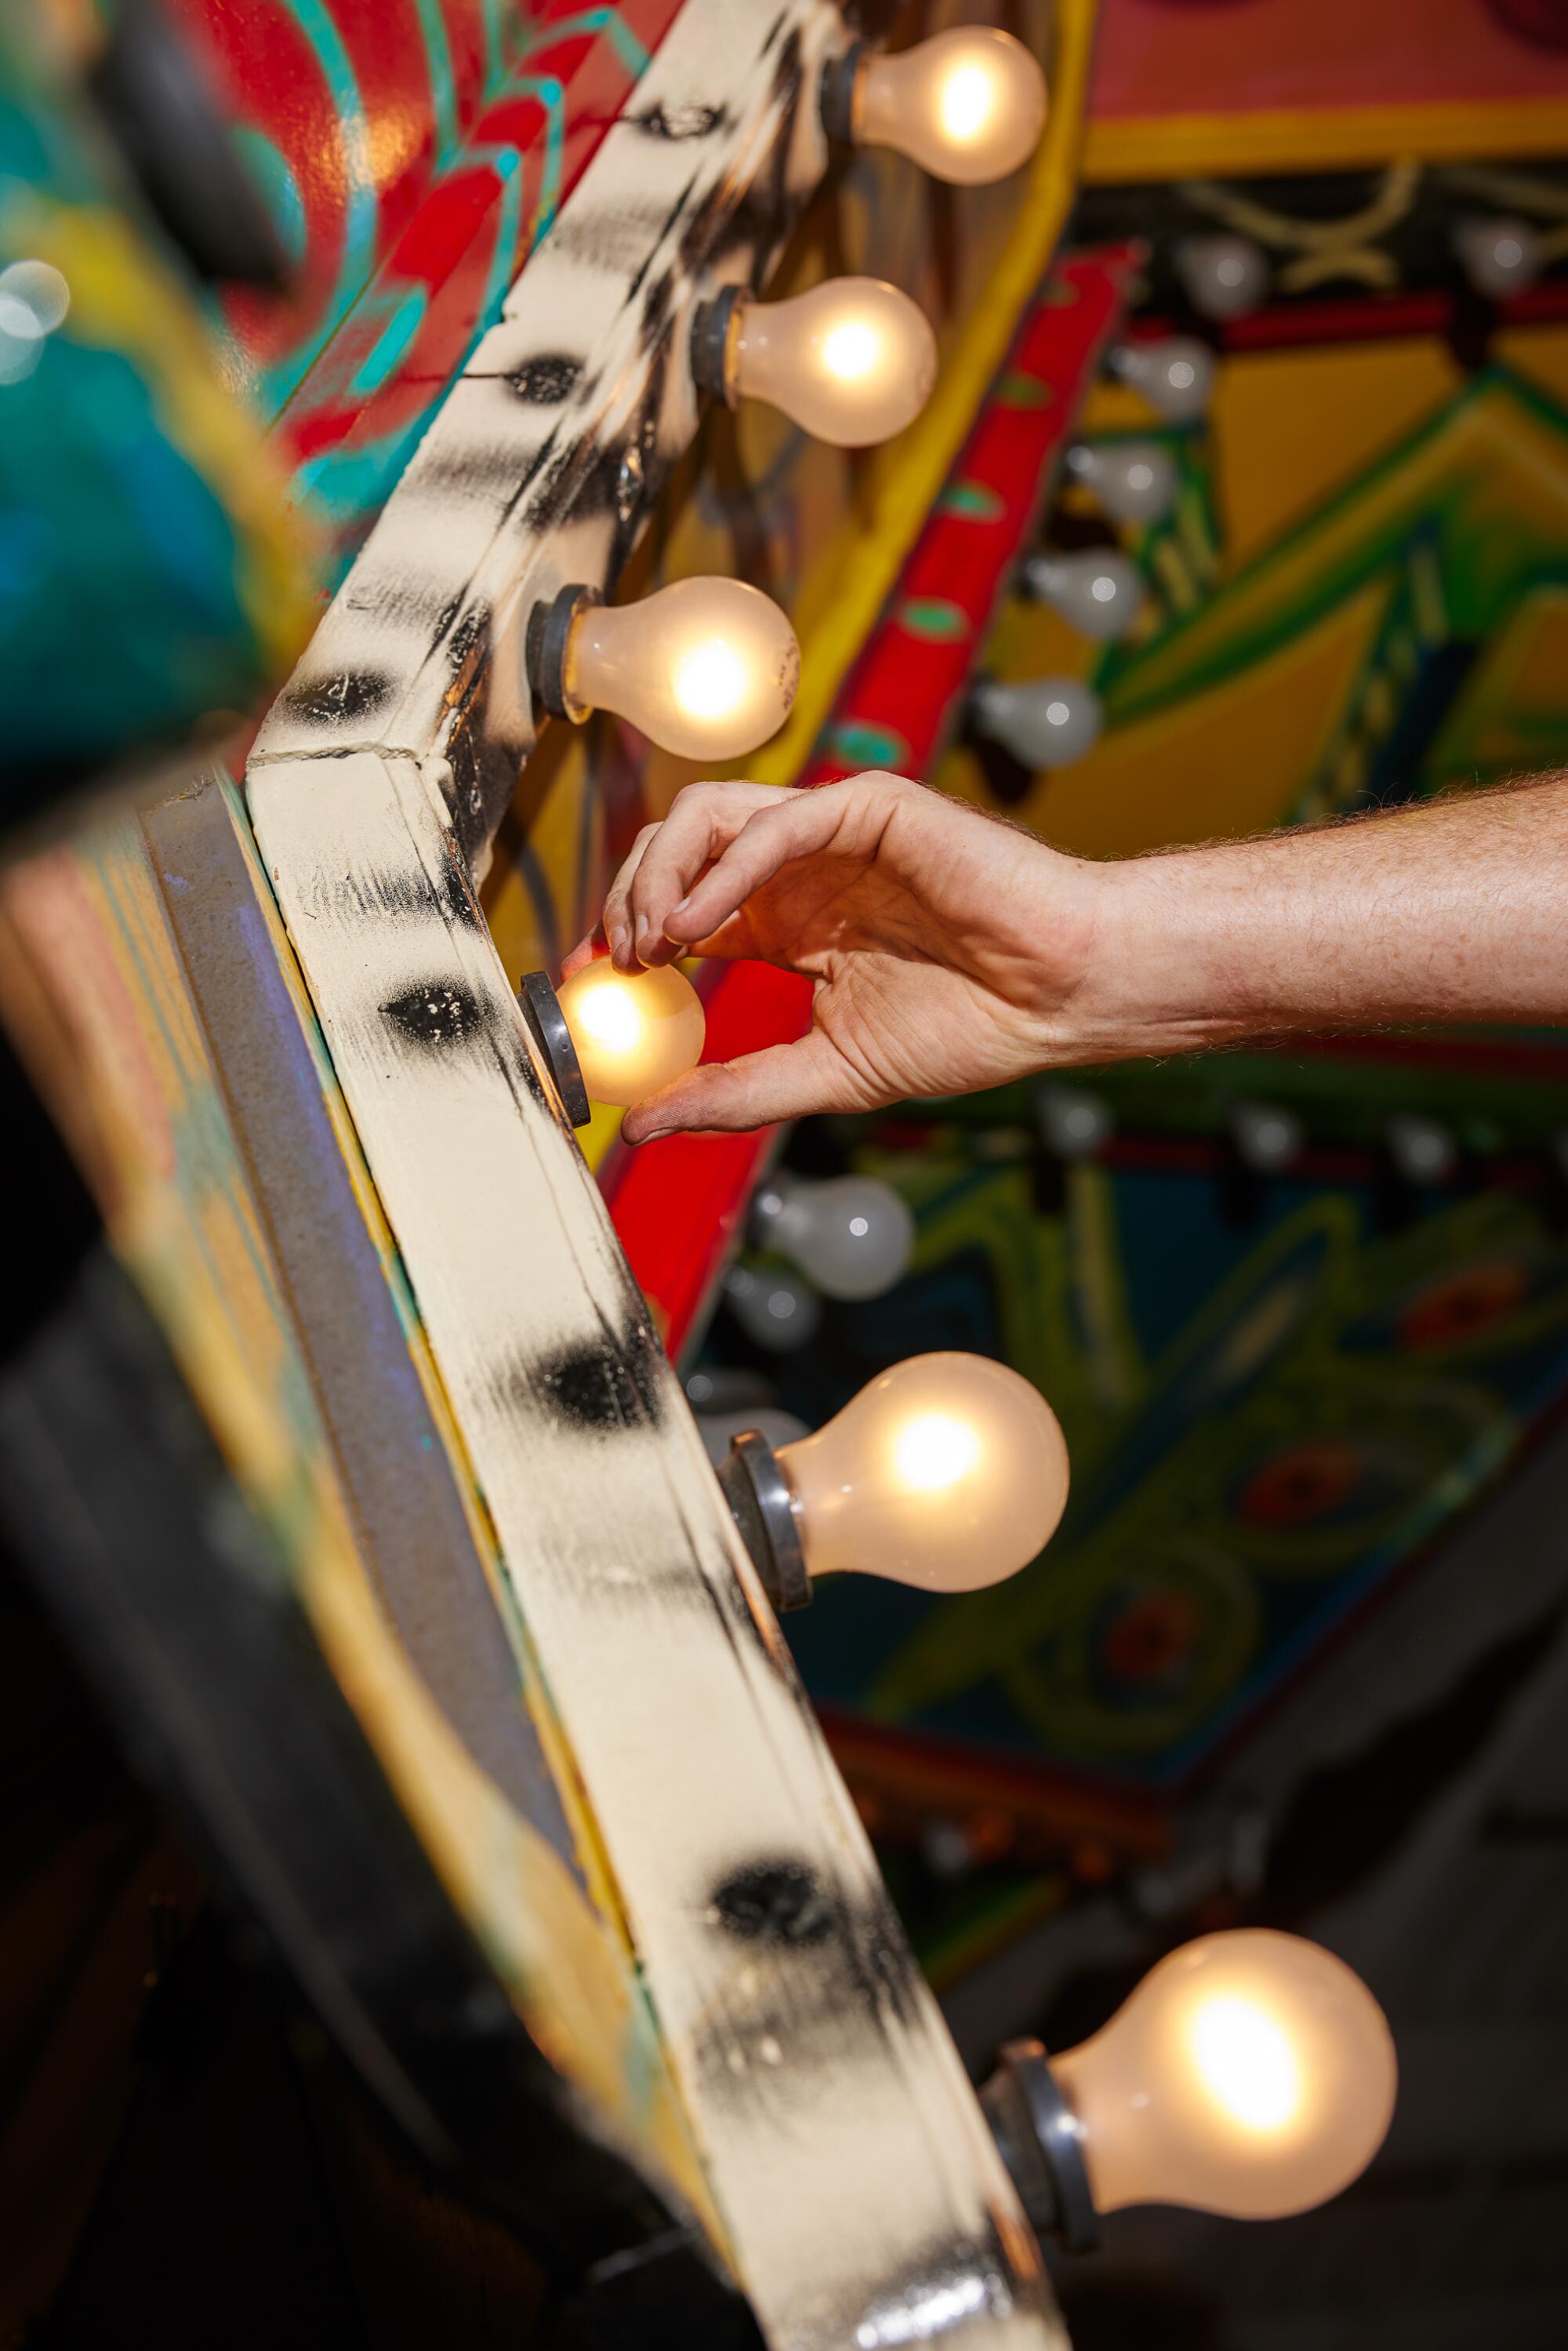 A hand screws in a light bulb on a carnival ride, seen in closeup